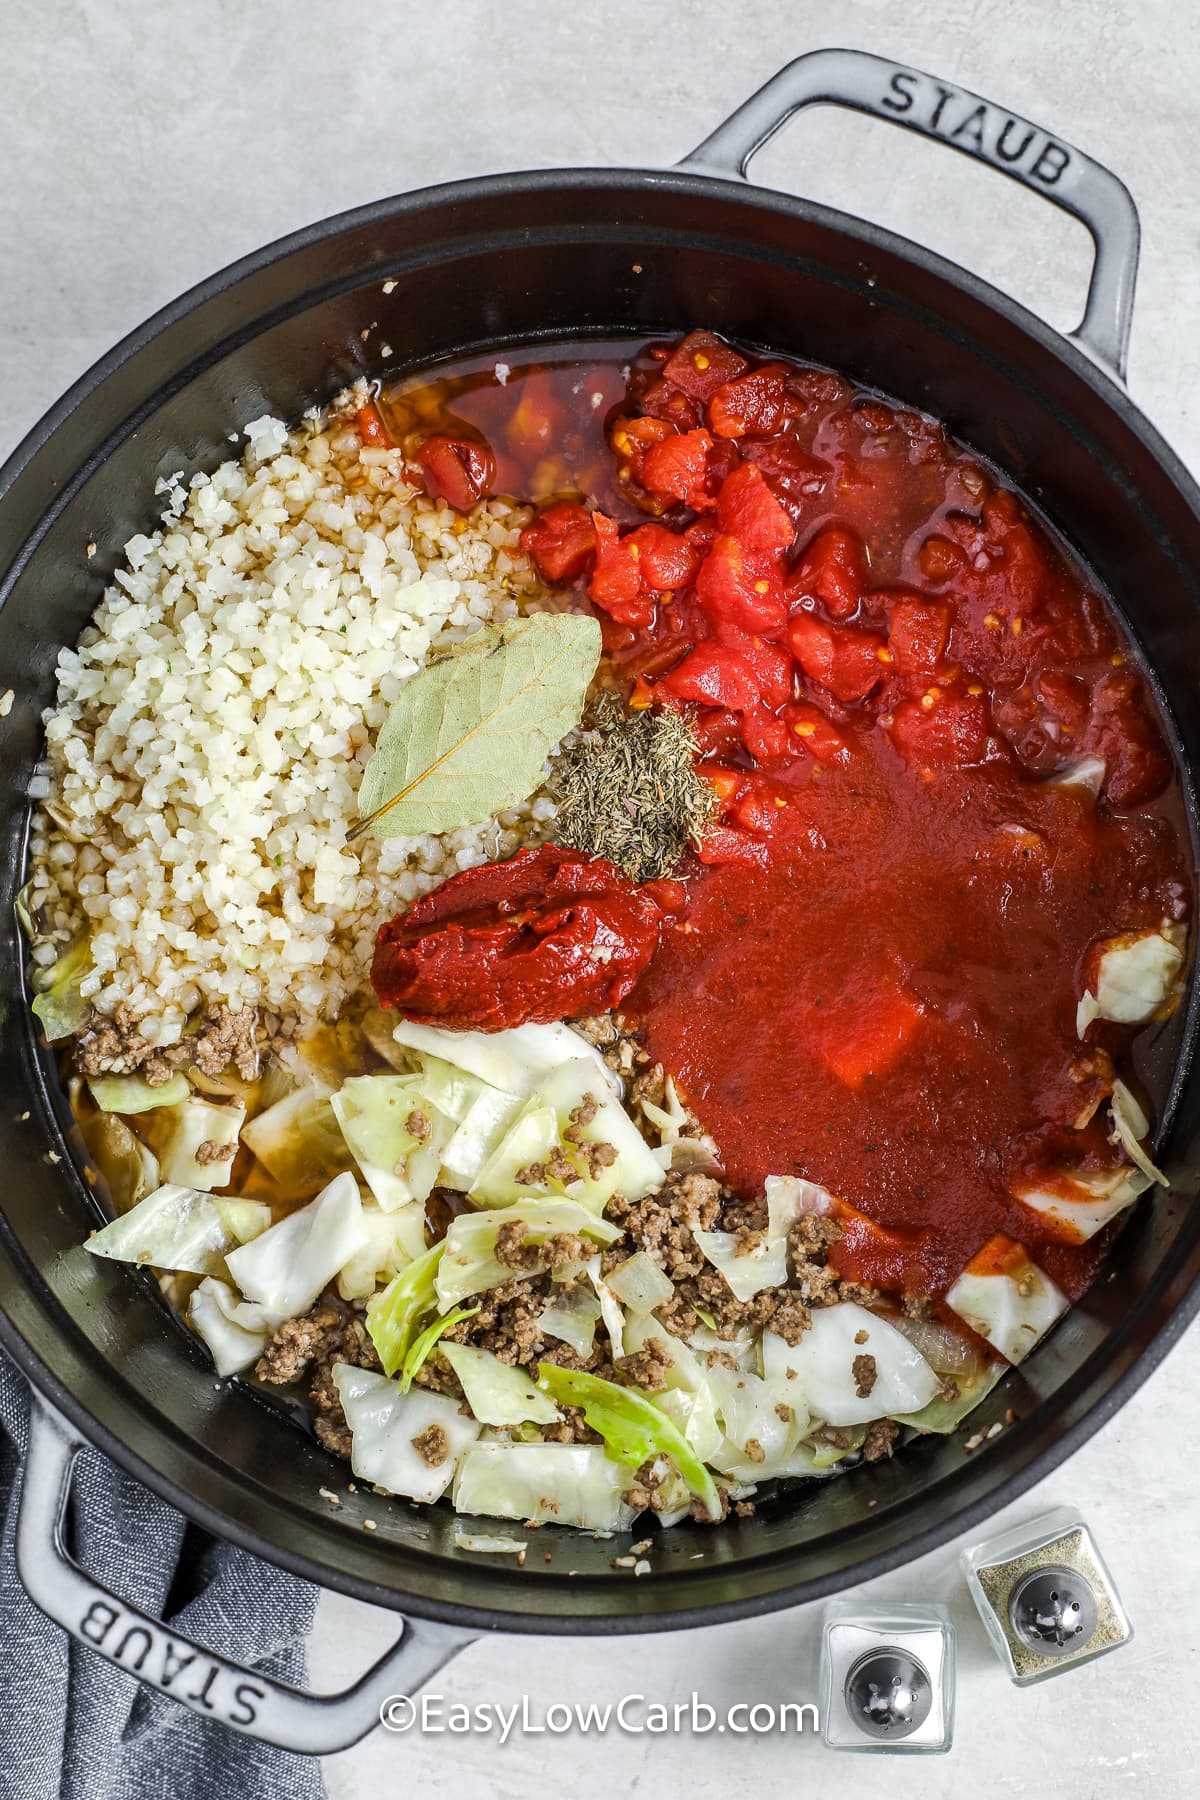 Ingredients to make cabbage roll soup in a pot